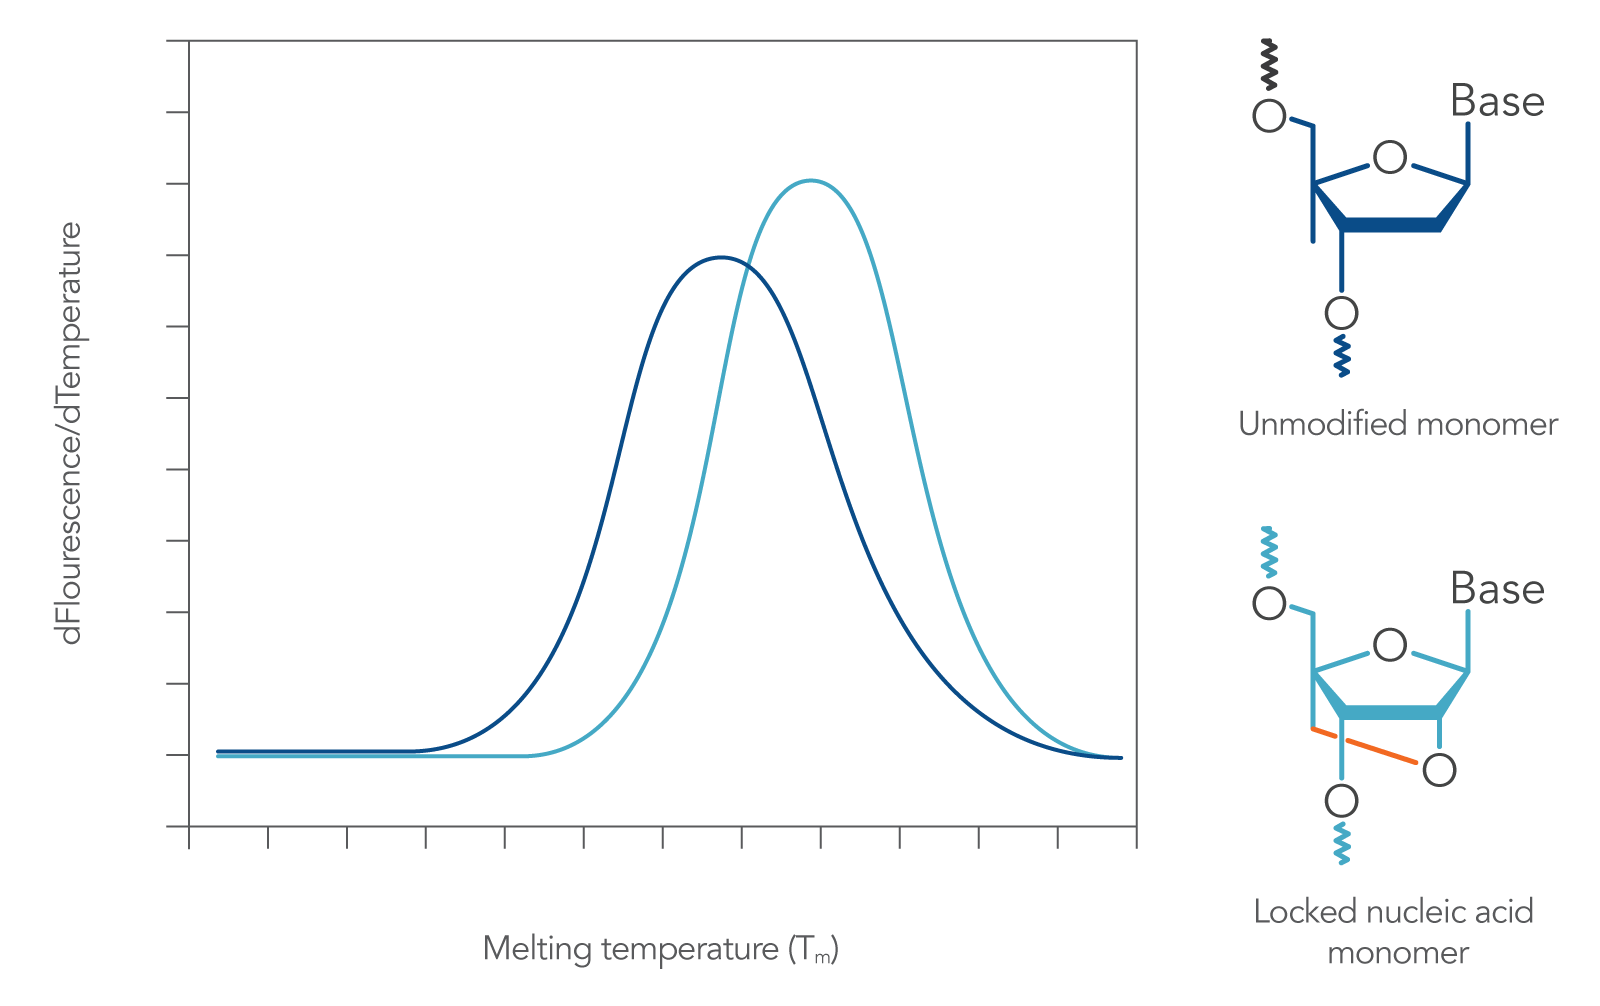 Locked nucleic acid bases increase sequence melting temperature